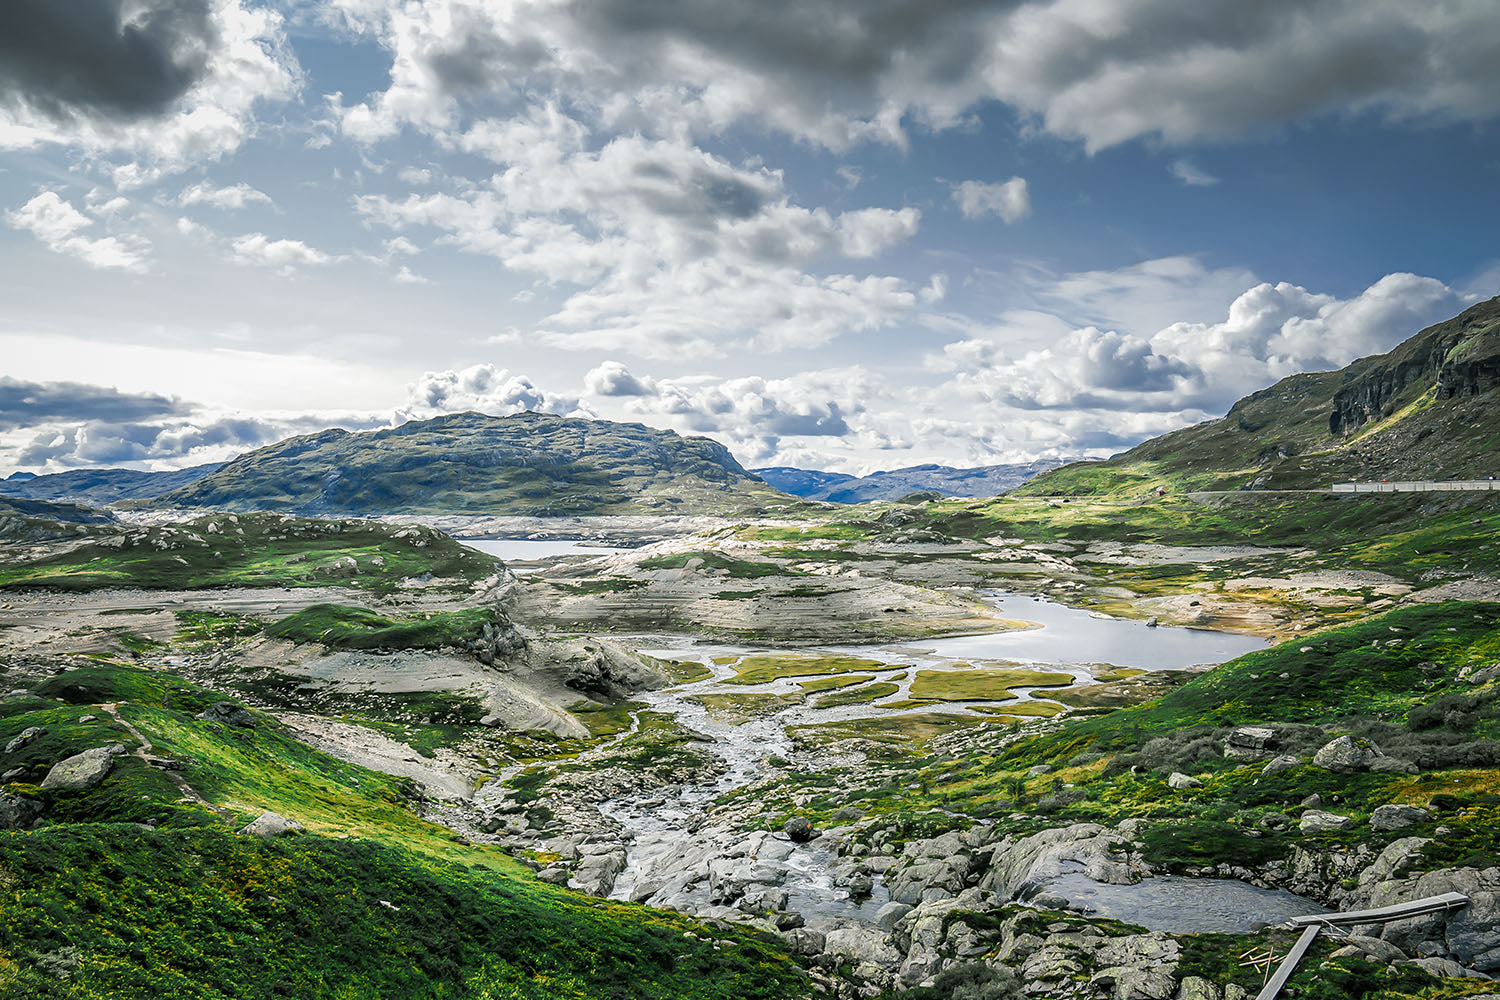 Sinuous rivers in Norway